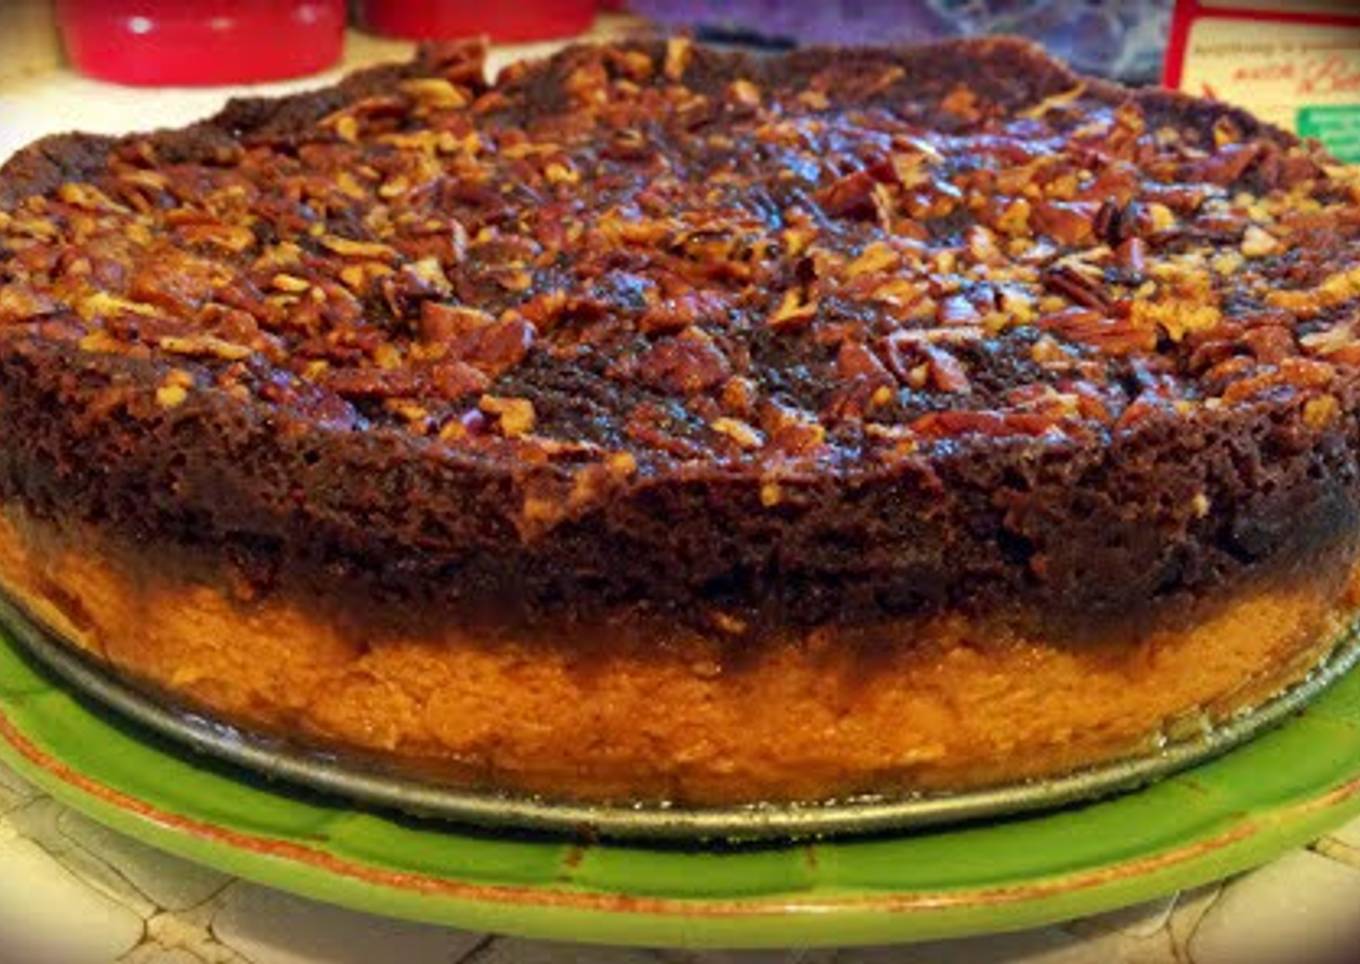 Chocolate pie with pumpkin and pecans